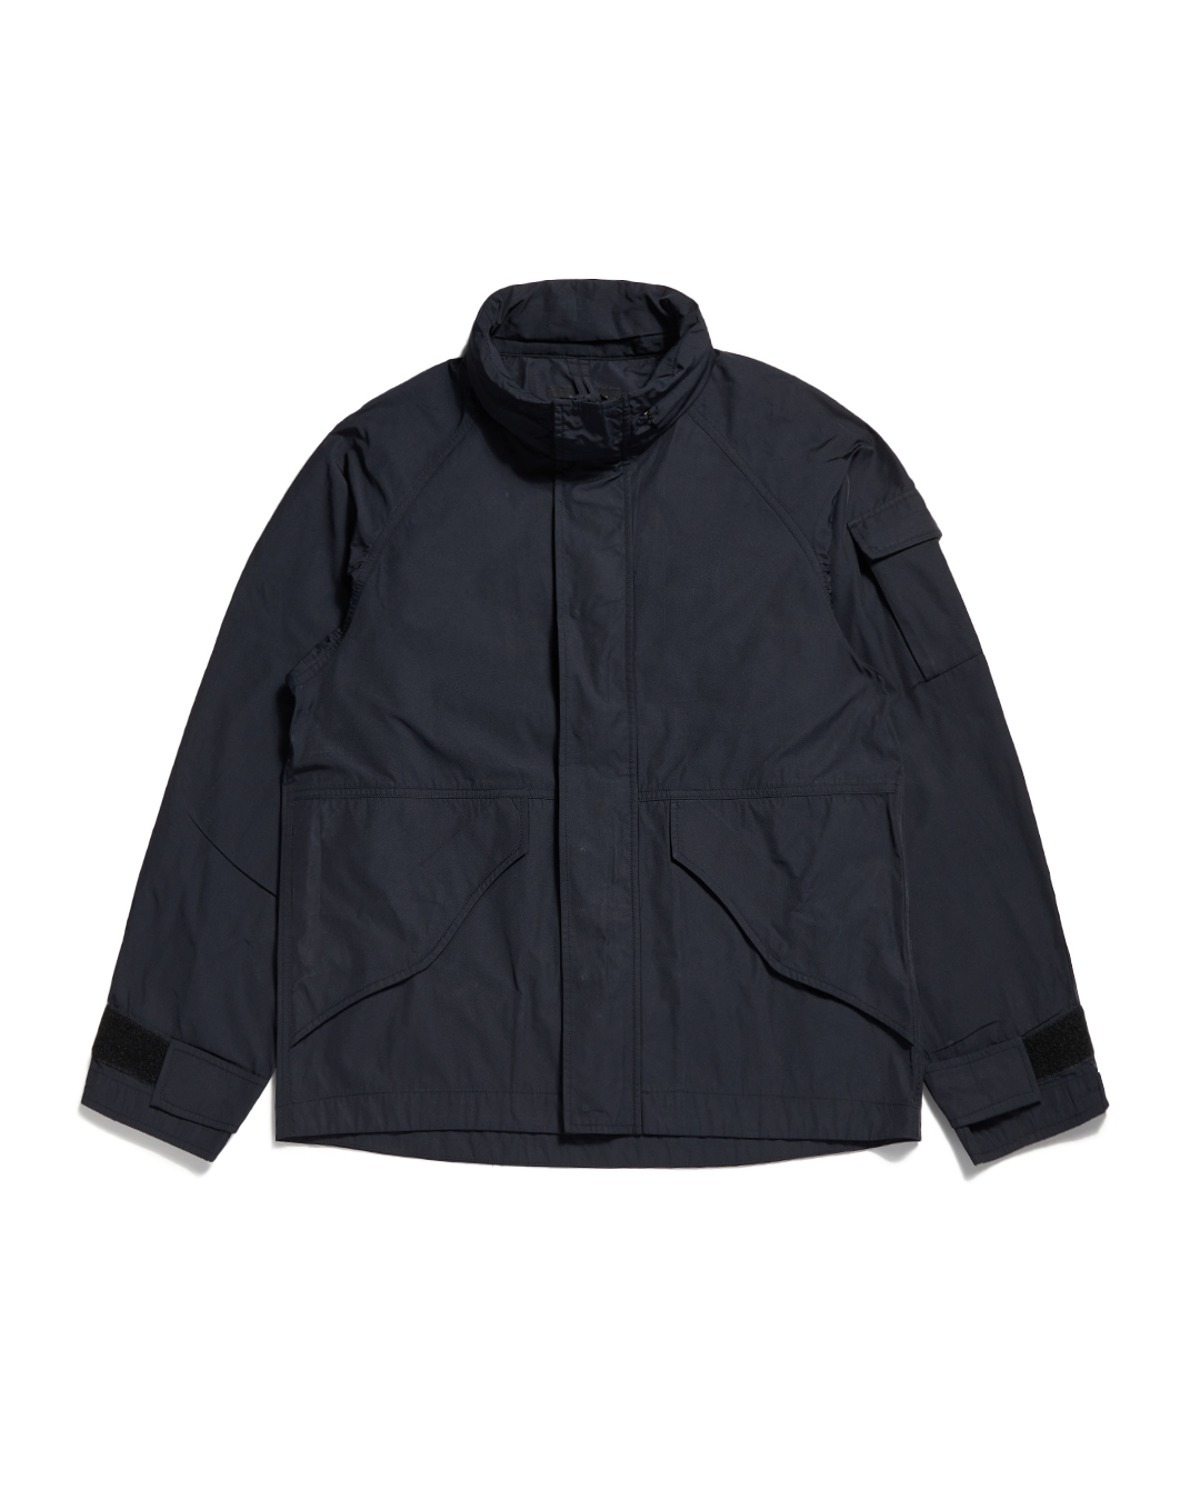 PROTECTED FIELD PARKA	/ BLACK